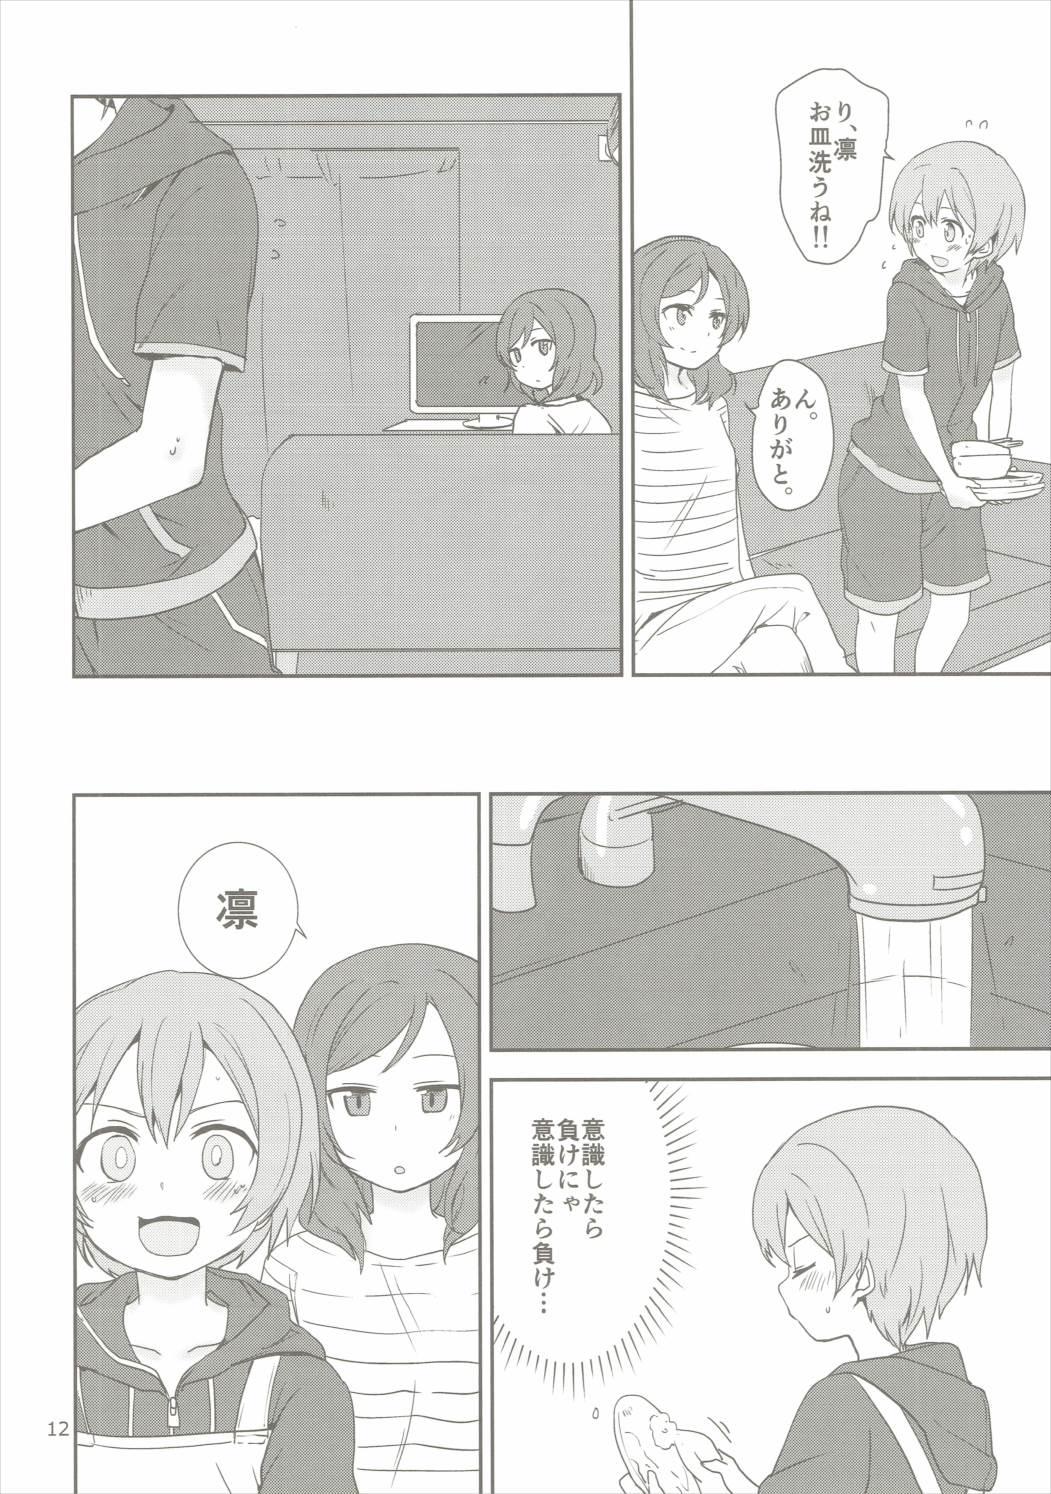 Chastity Dokodemo Issho - Love live Matures - Page 11